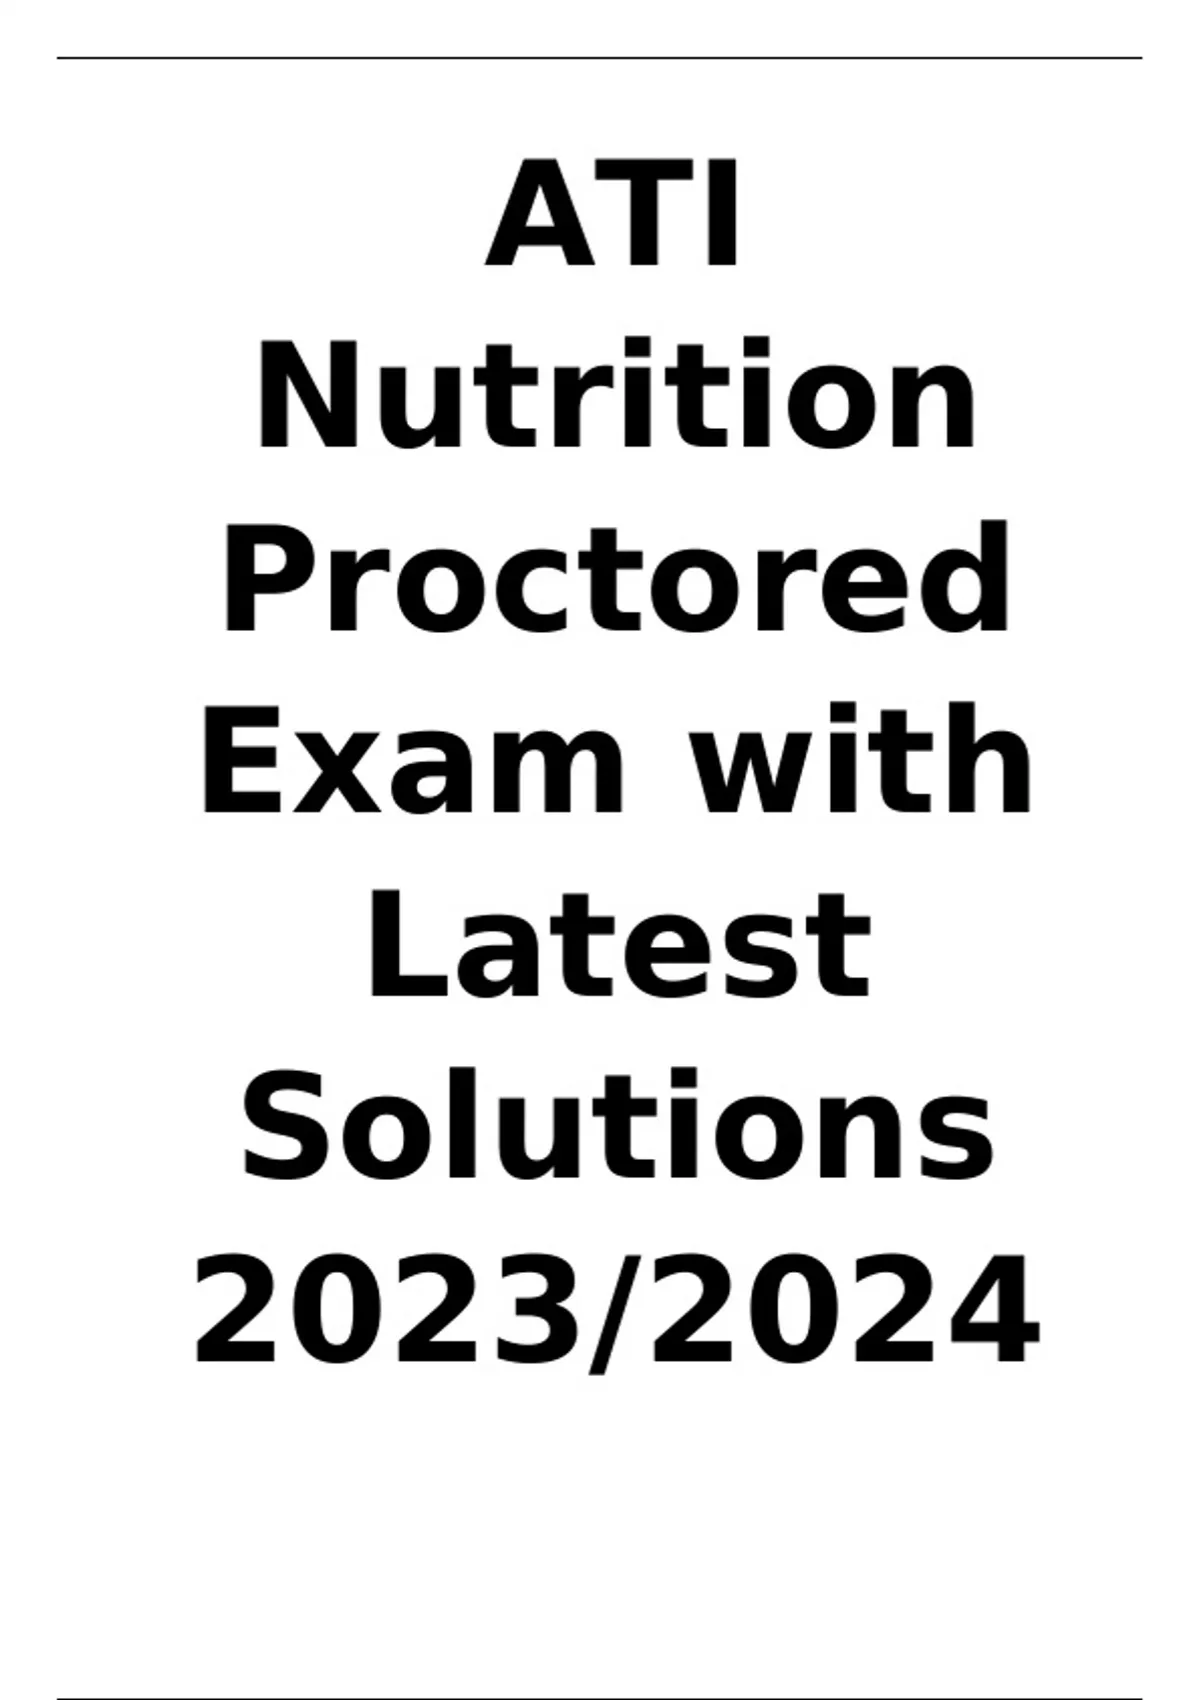 ATI Nutrition Proctored Exam with Latest Solutions 2023/2024 ATI